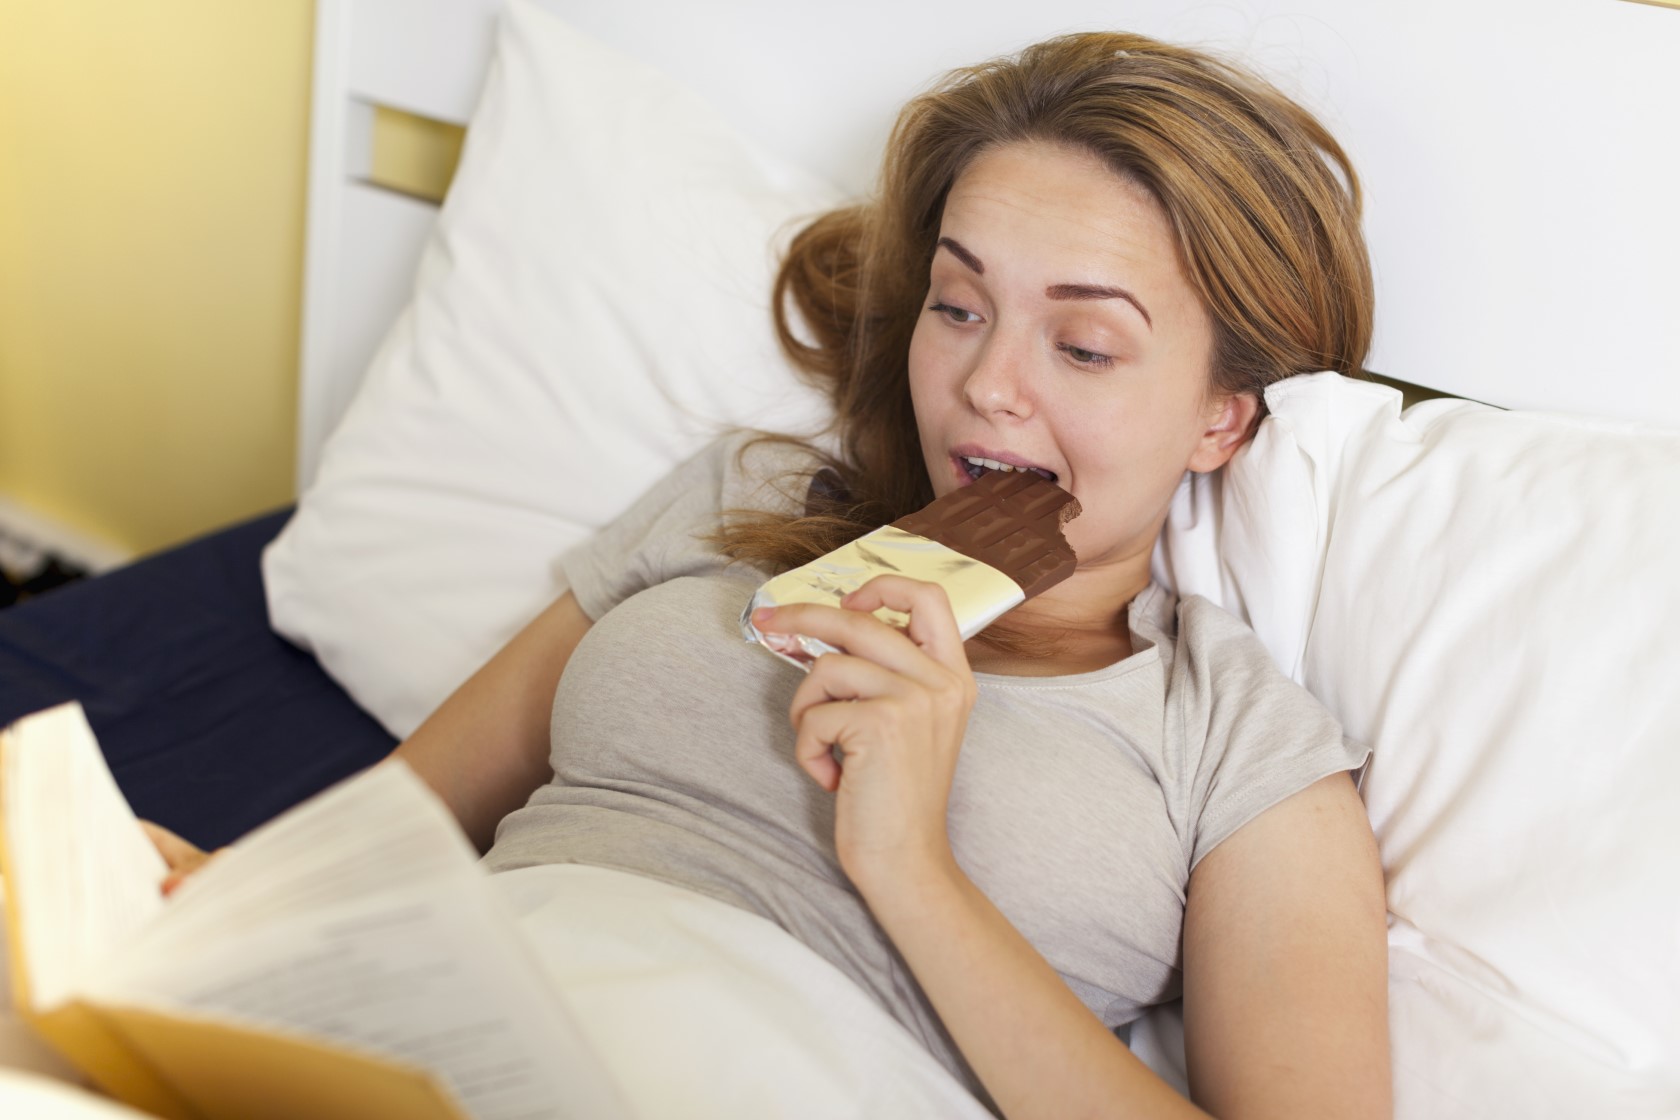 Dealing with PMS and premenstrual cravings.